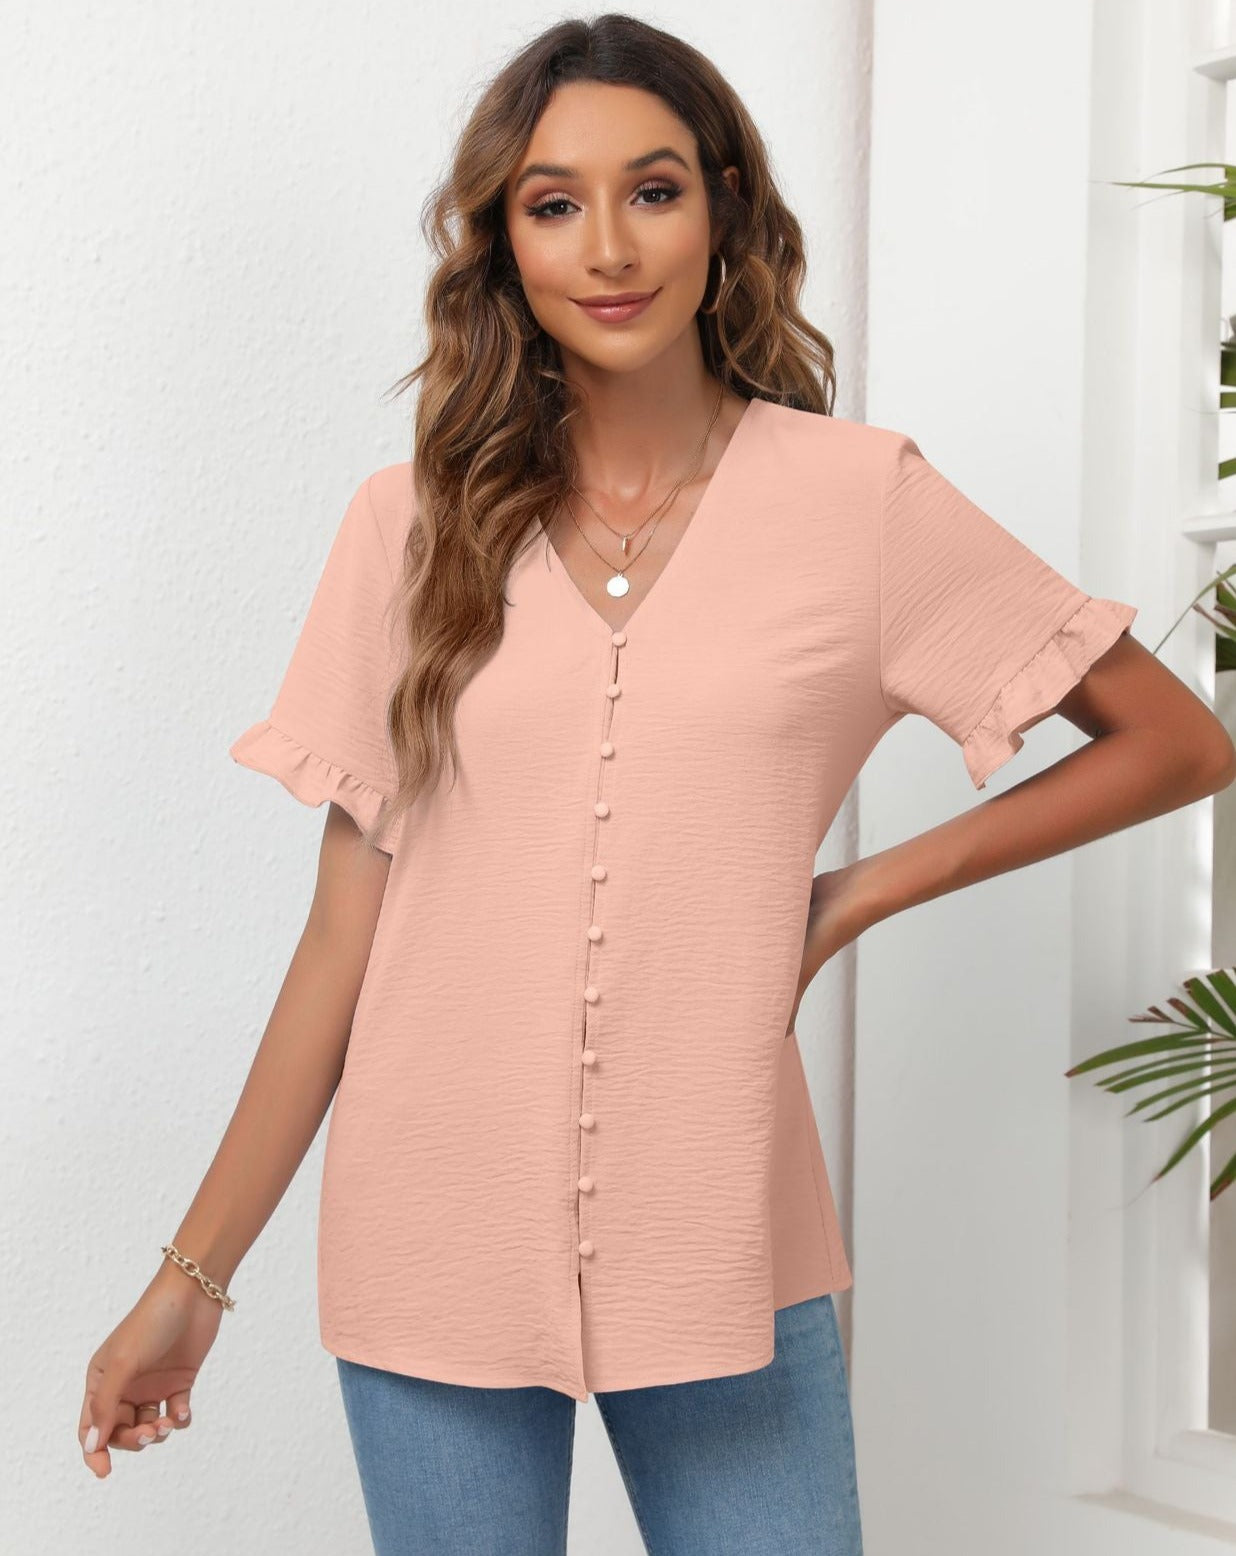 Solid Short Sleeve V Neck Buttons Down Blouse PInk